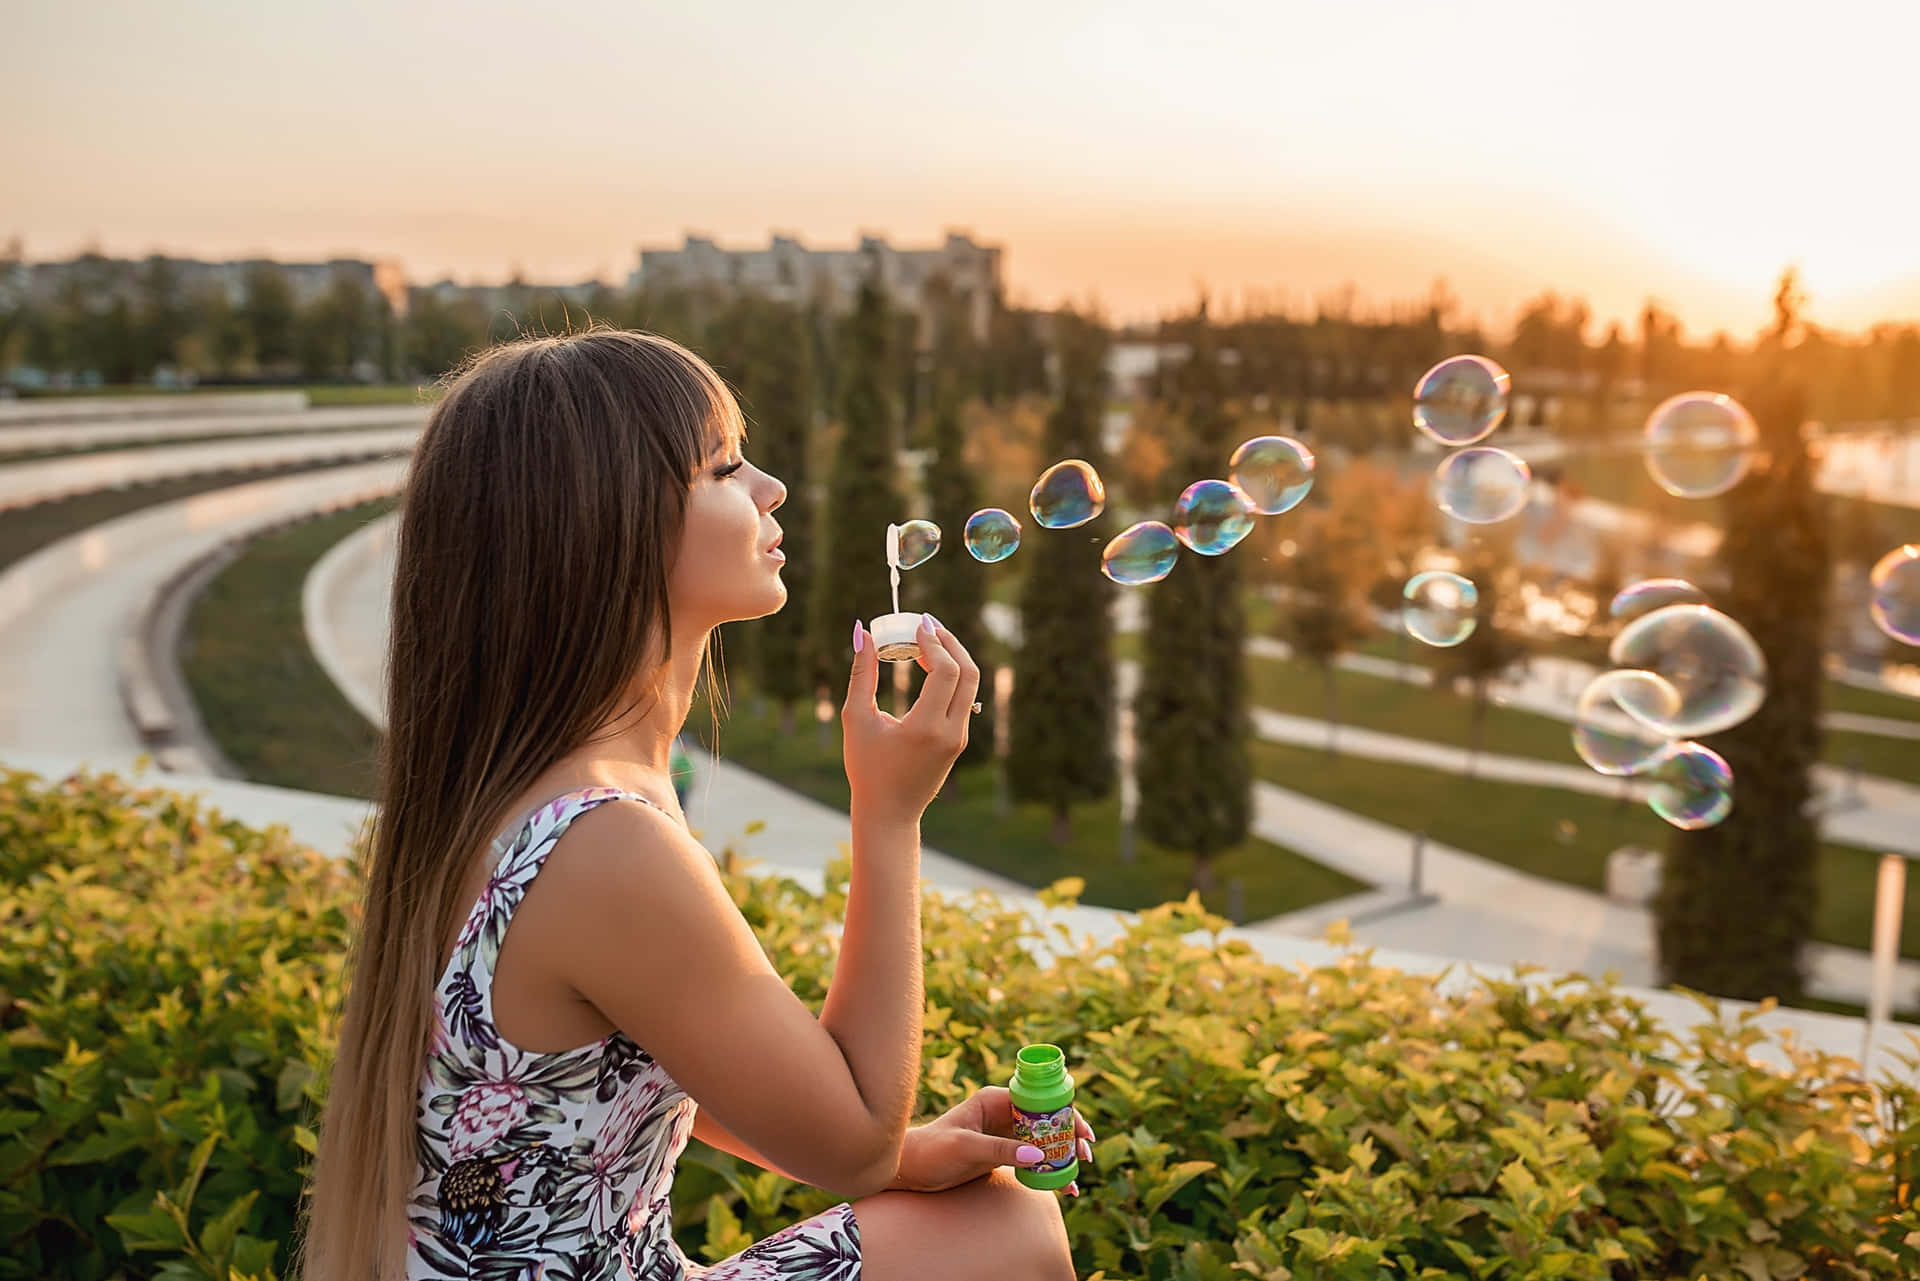 A Woman Blowing Soap Bubbles In The Park